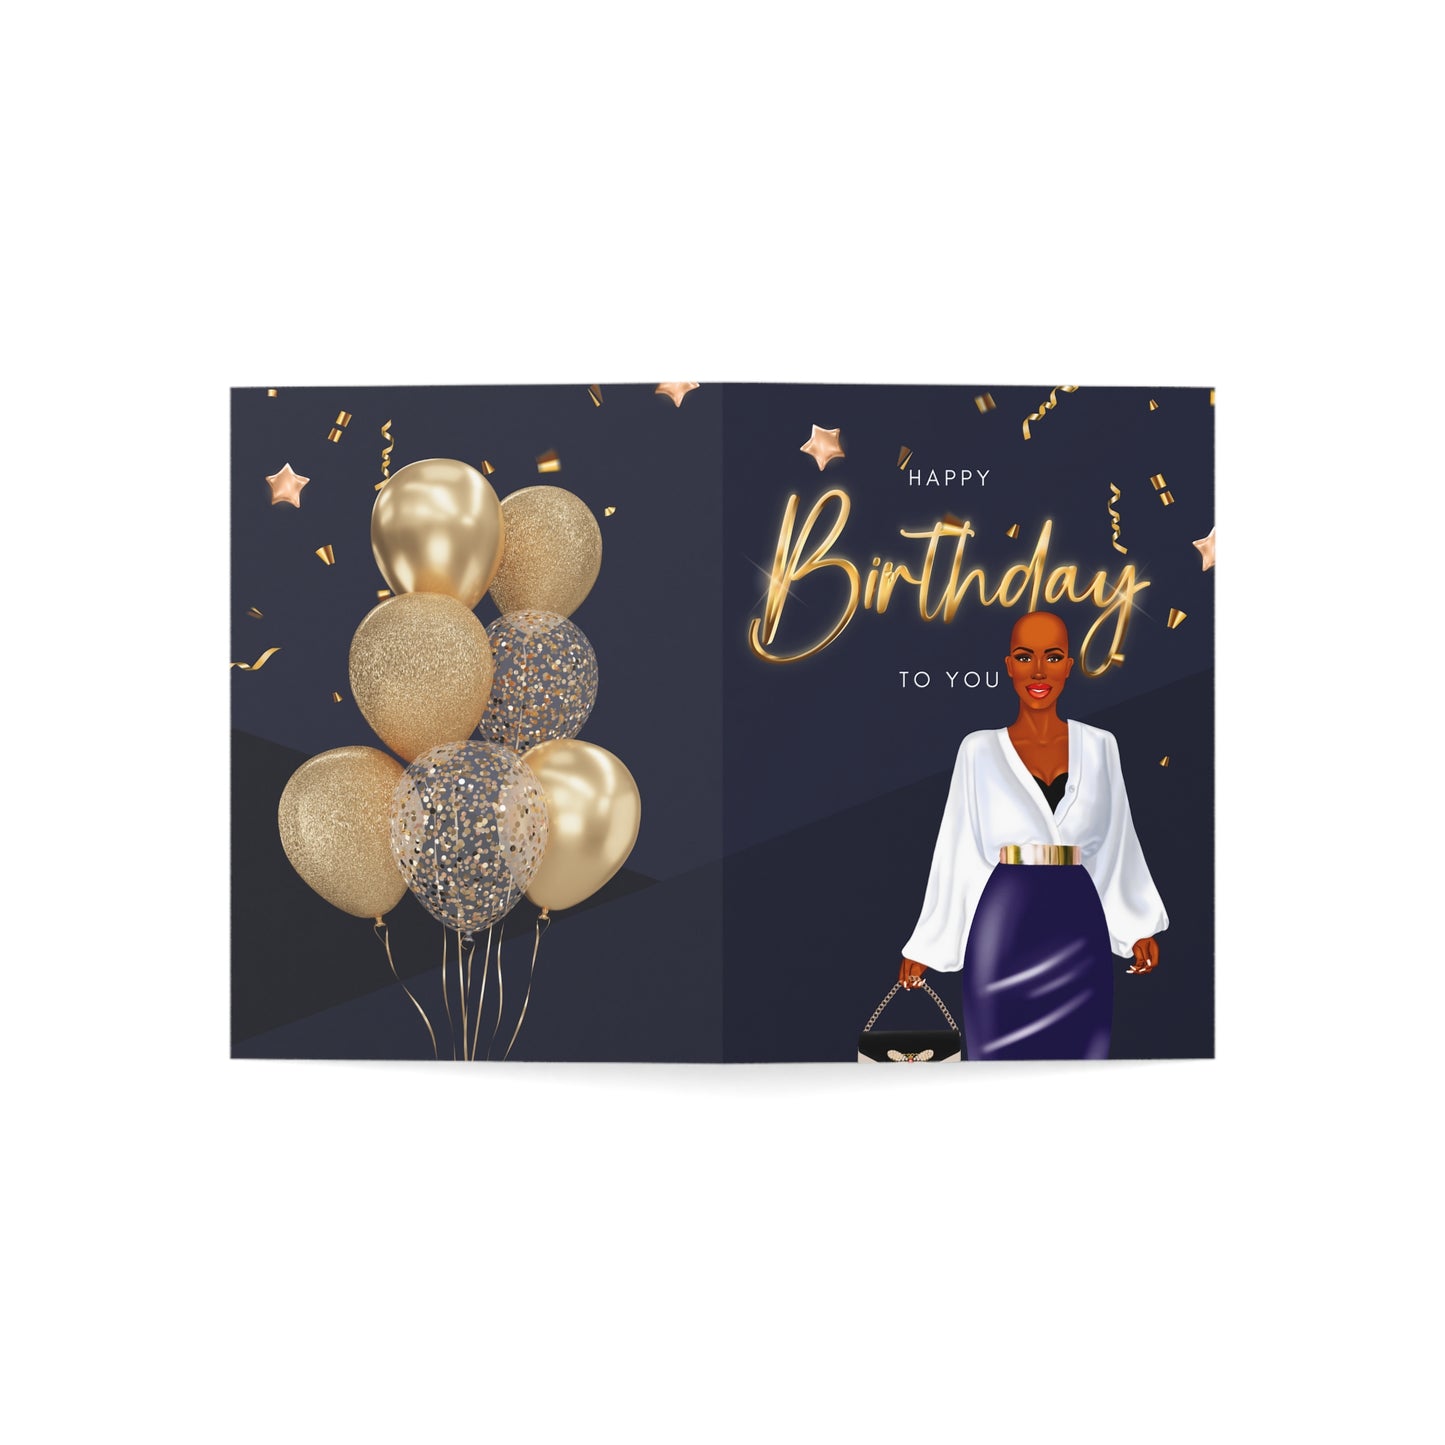 Happy Birthday Folded Greeting Card (1, 10, 30, and 50pcs)| Birthday Card with Black Woman